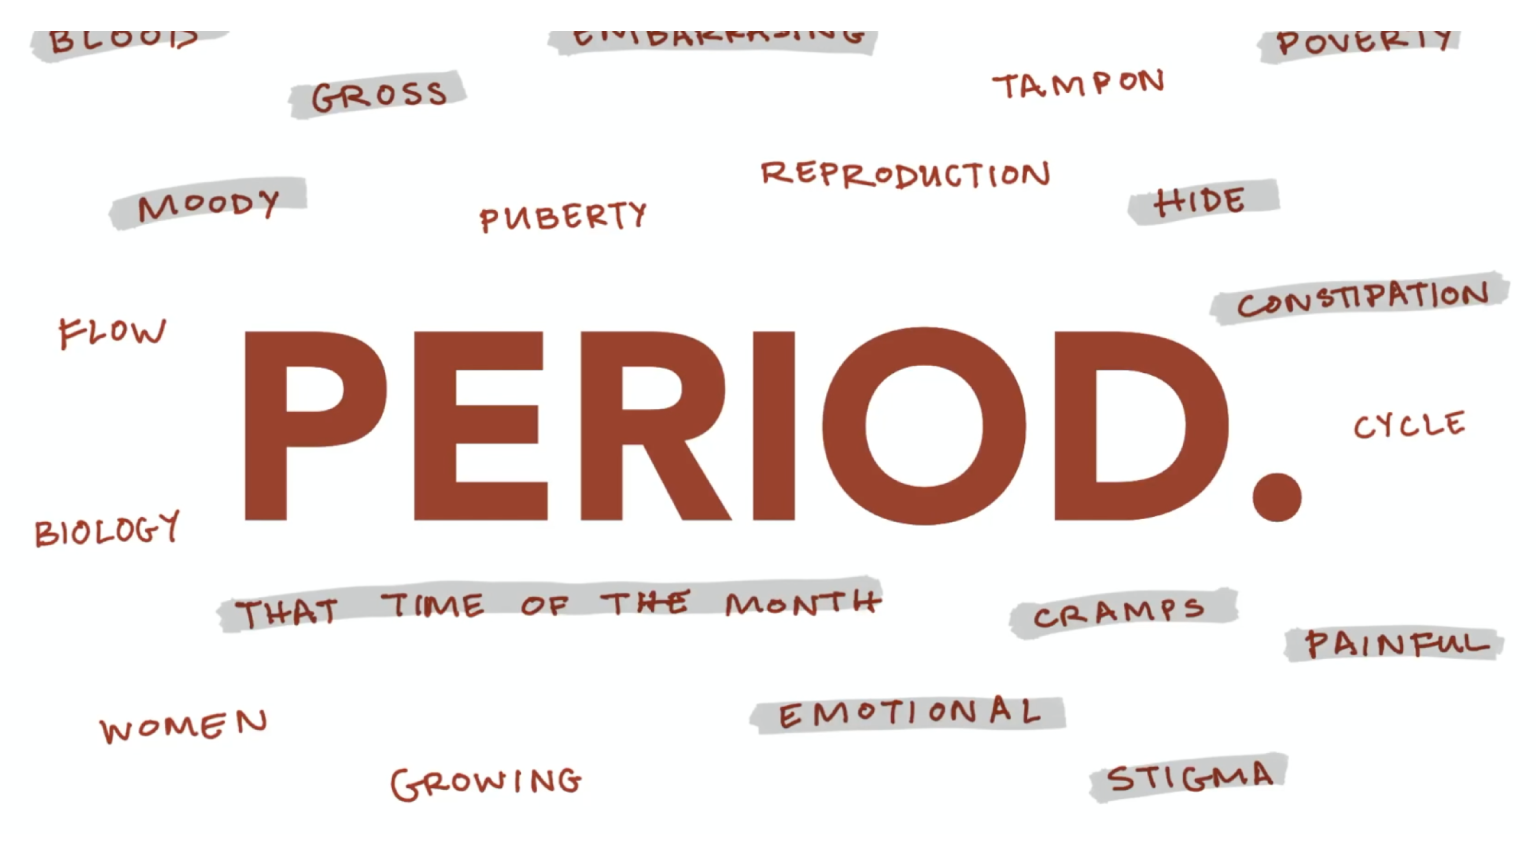 Let's Talk About Periods